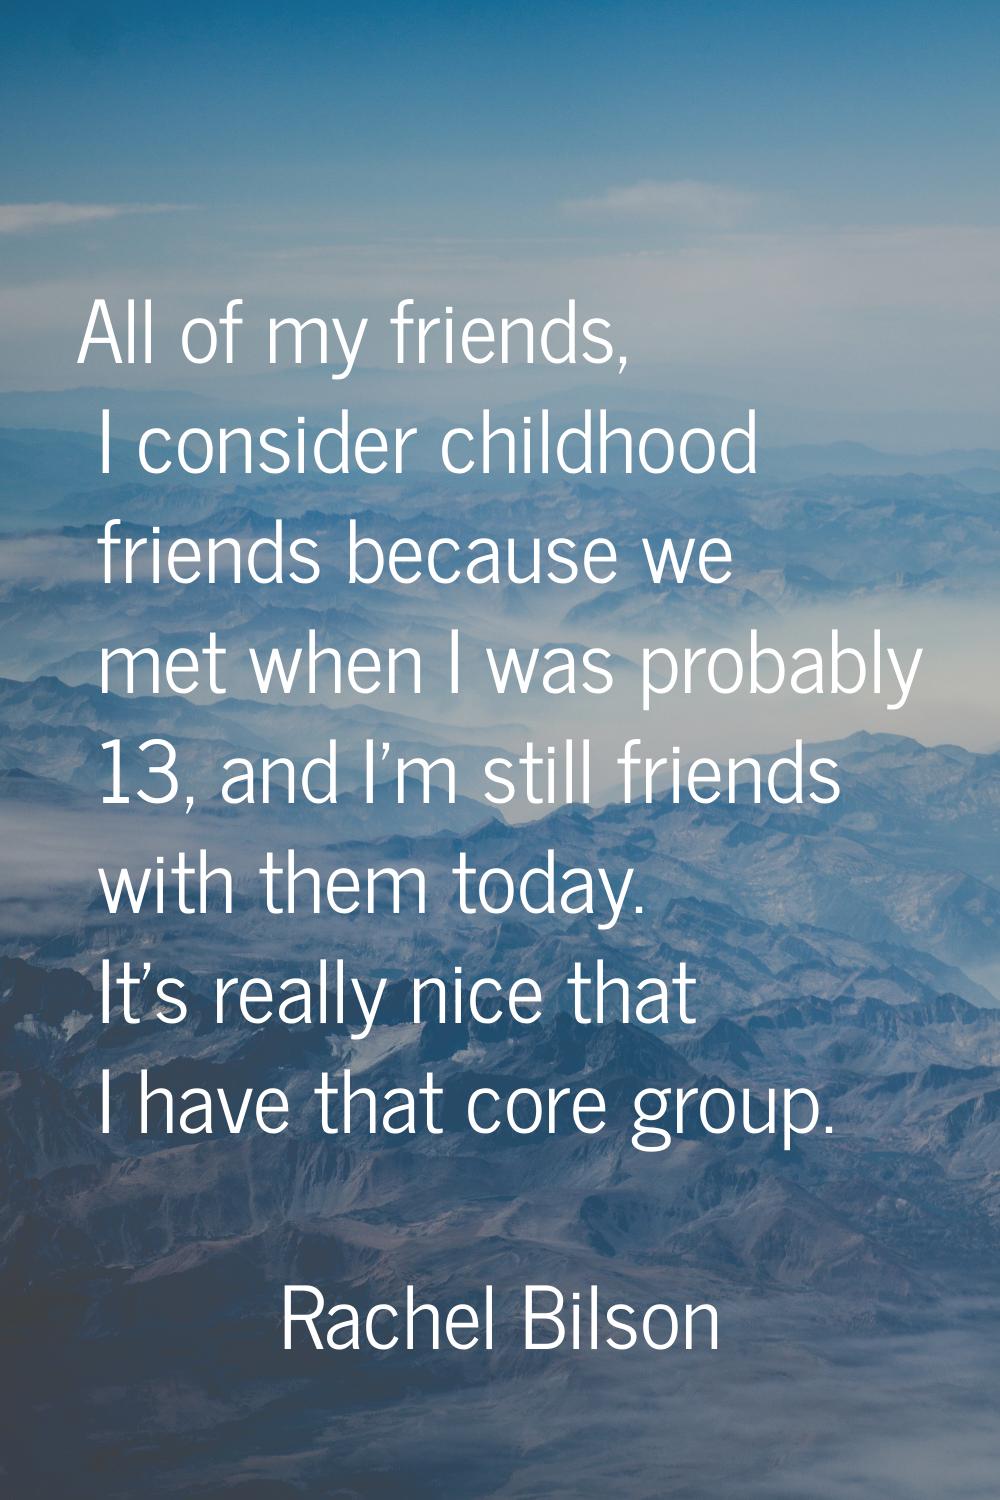 All of my friends, I consider childhood friends because we met when I was probably 13, and I'm stil